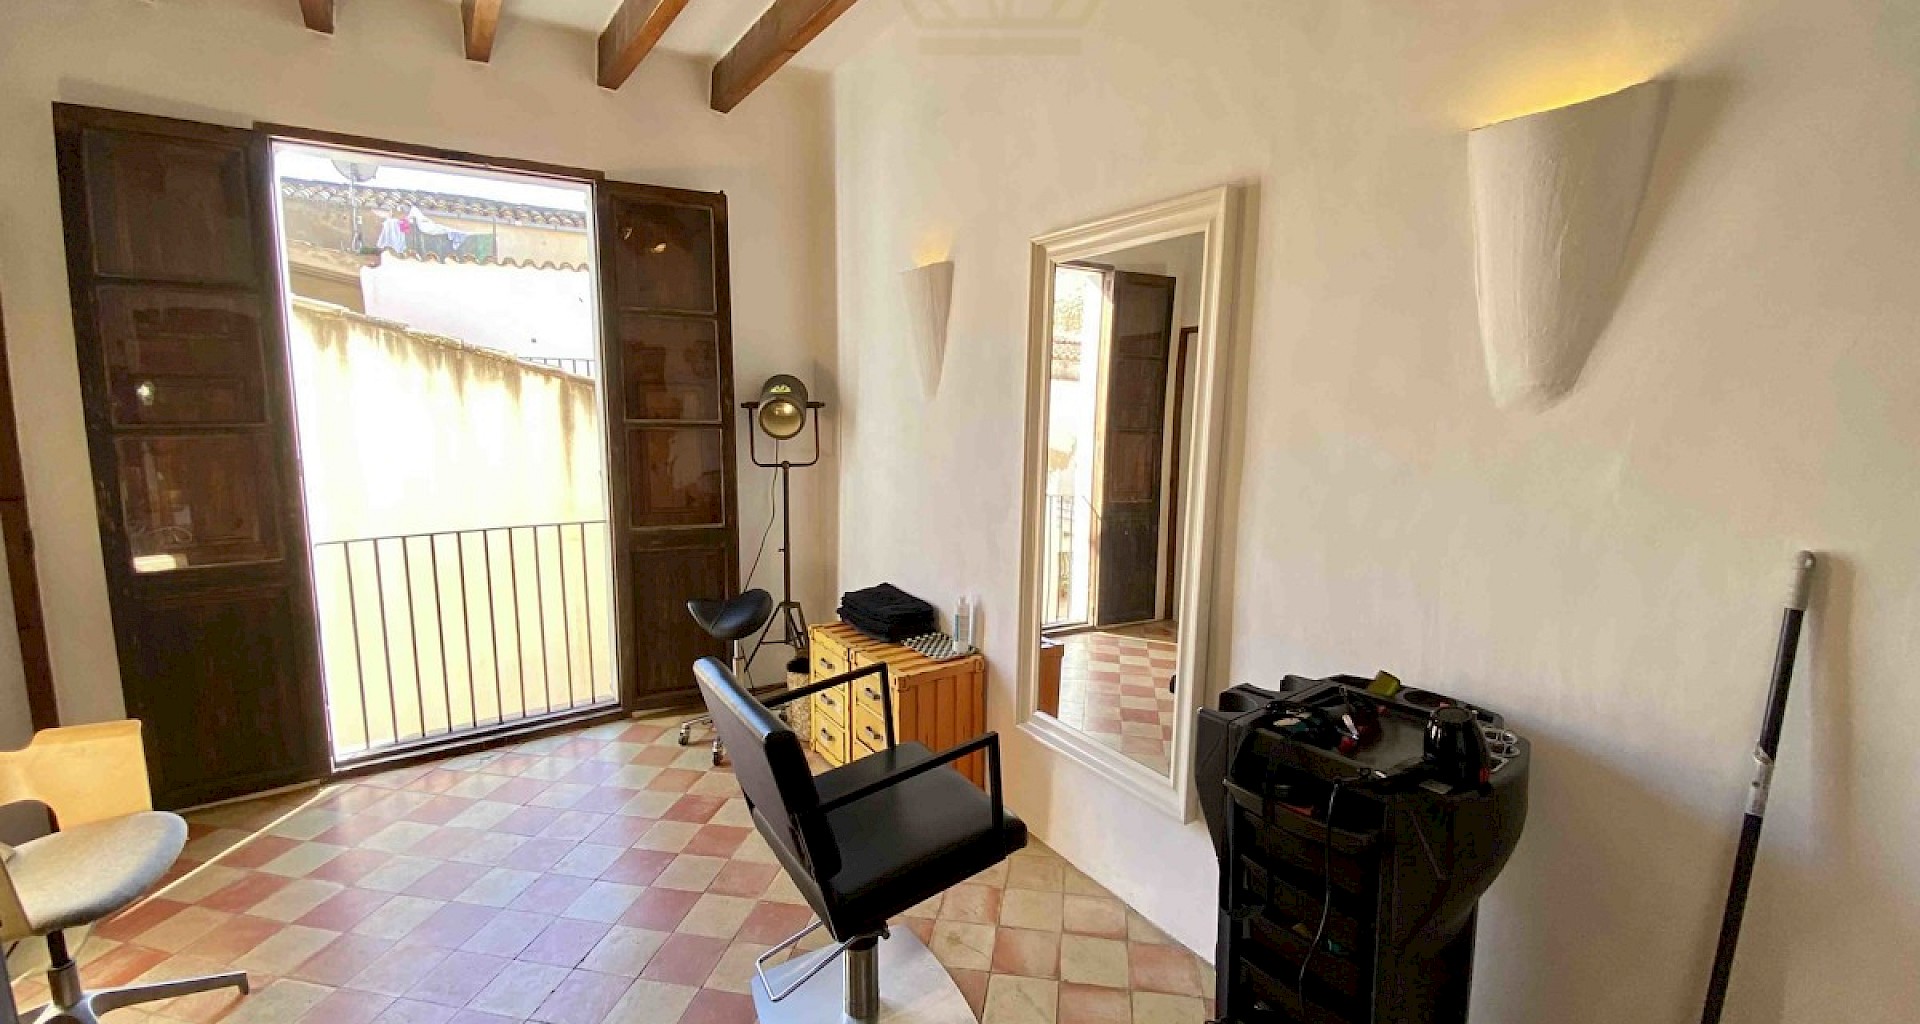 KROHN & LUEDEMANN Cosy townhouse in Andratx village with charming character Mallorquinisches Stadthaus in Andratx